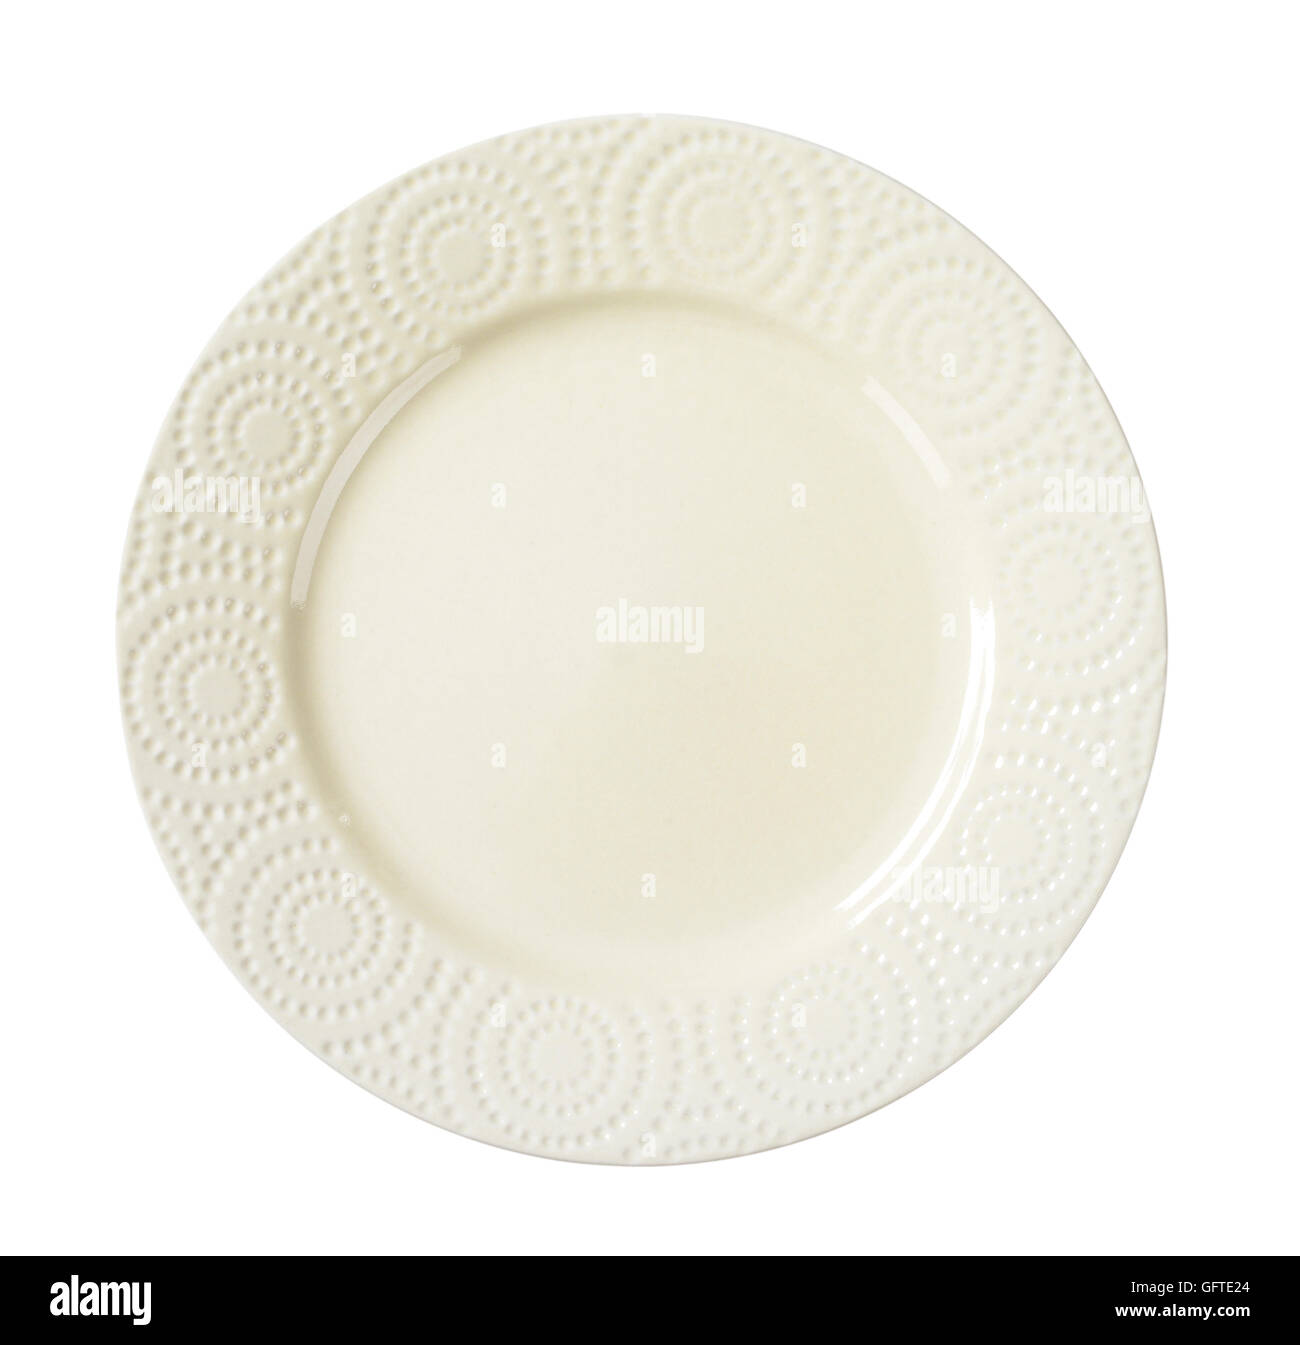 dinner plate with decorative rim Stock Photo